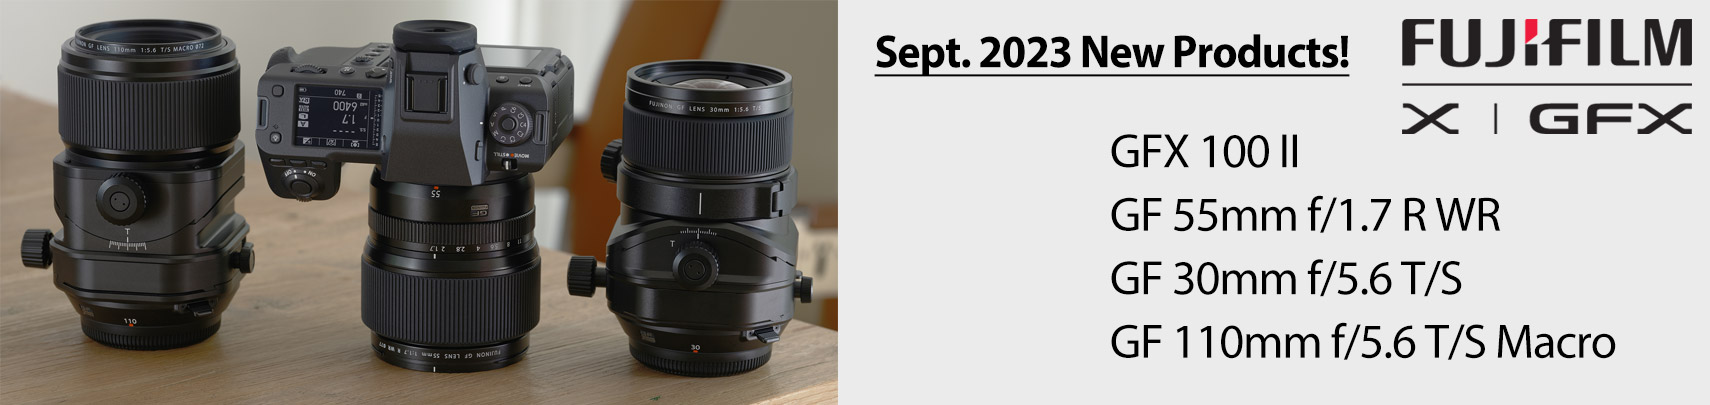 Fujifilm new products Sept. 2023 banner